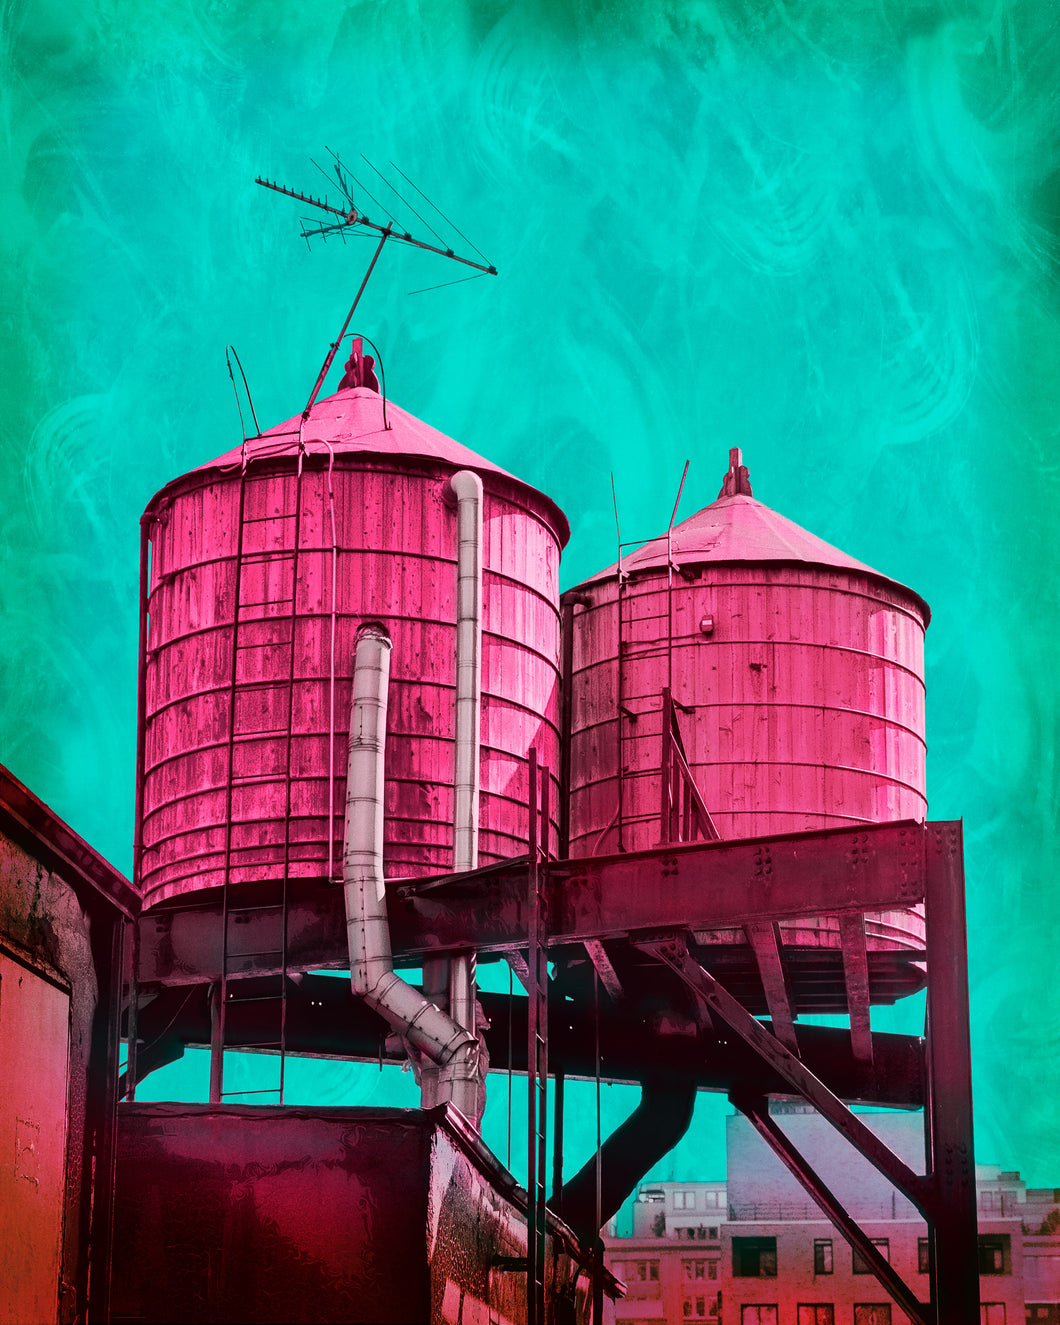 pop art image of new york water towers in pink with a swirly hand painted teal sky